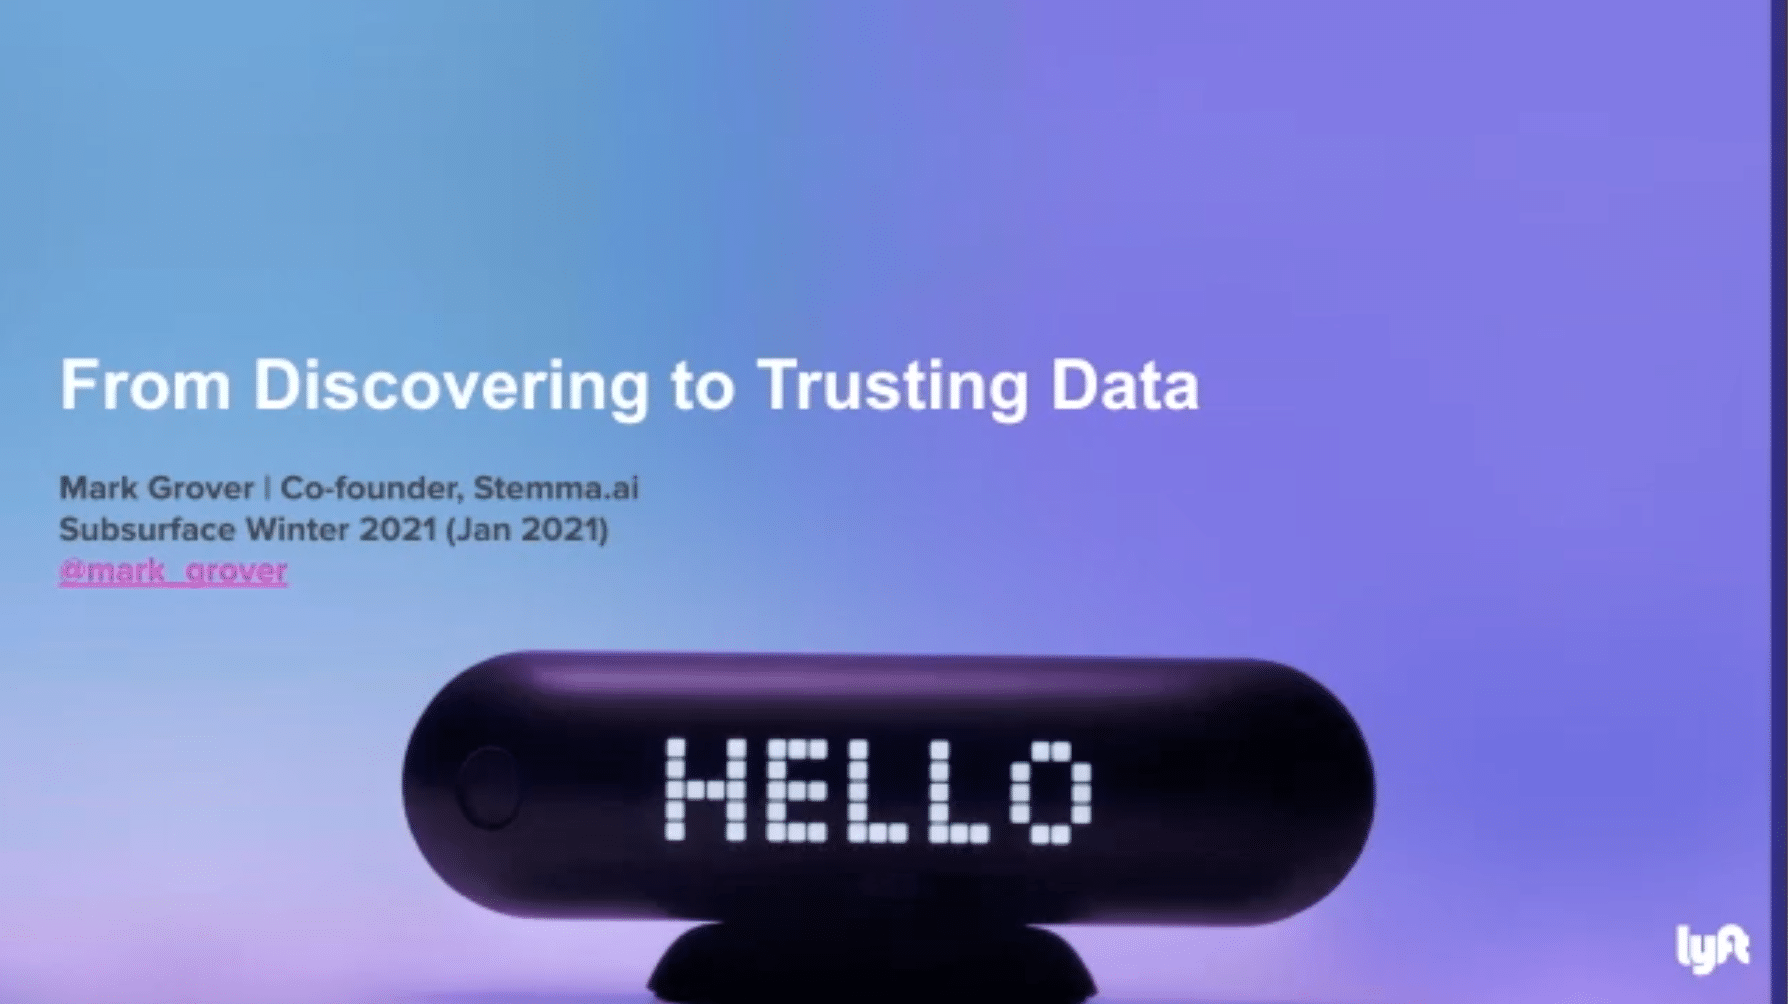 From Discovering Data to Trusting Data